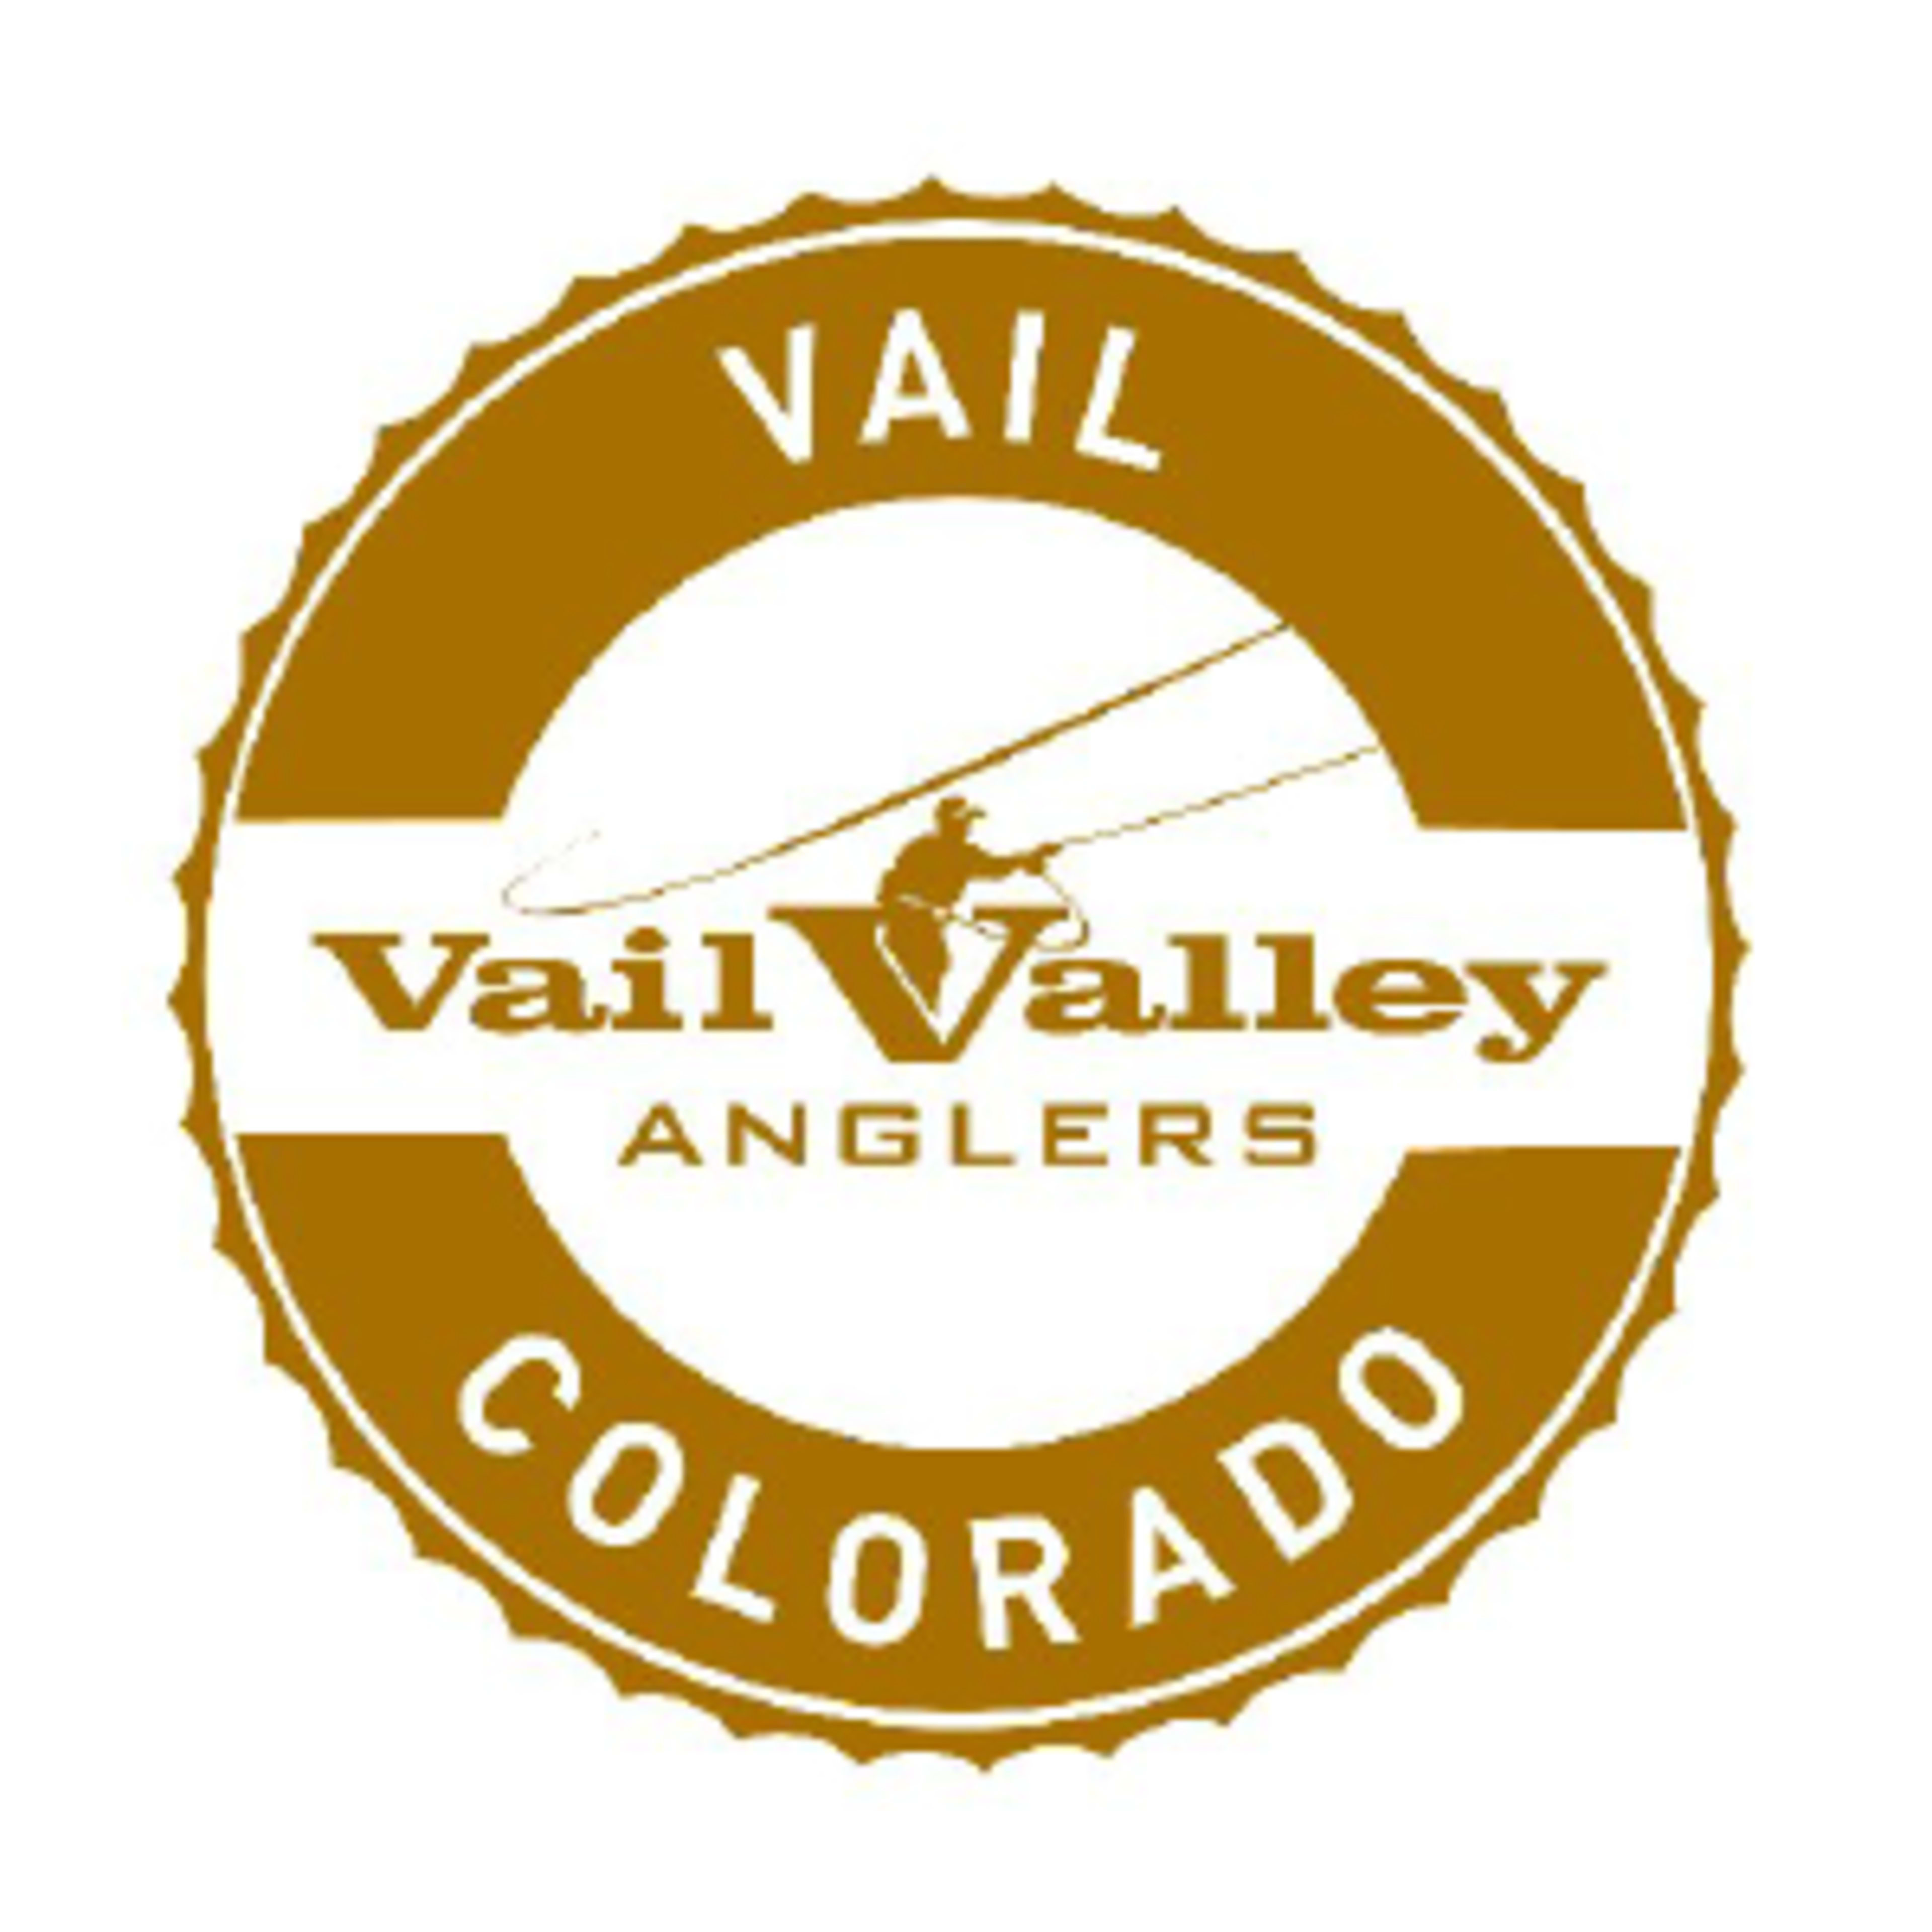 Vail Valley AnglersCode